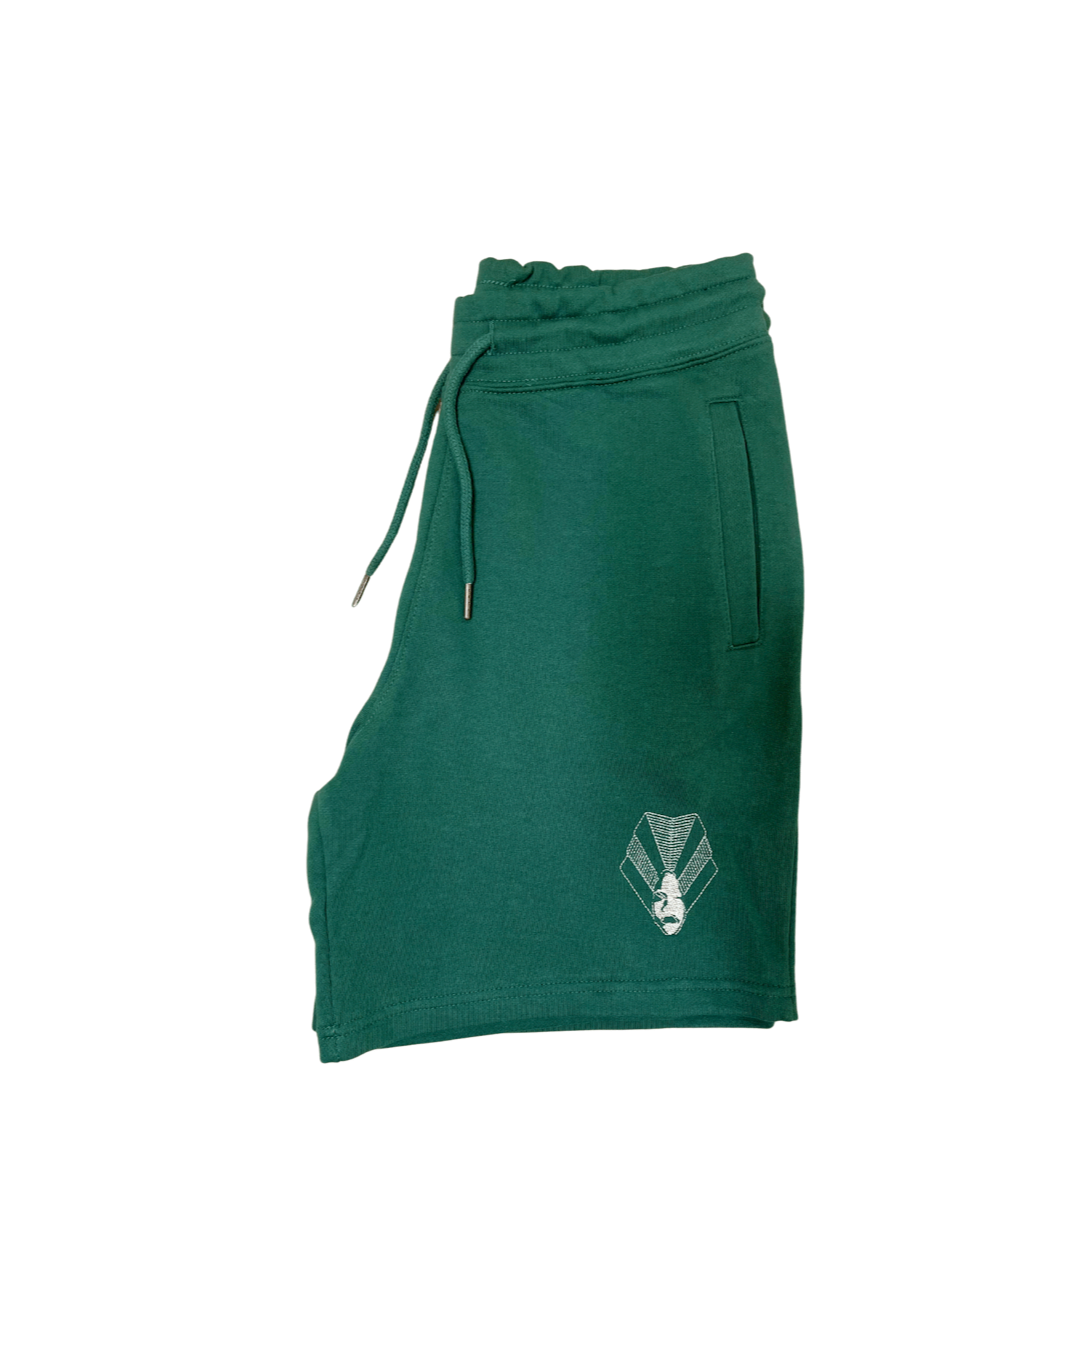 ROYALTY Embroidered Sweatshorts - ParrisPieces